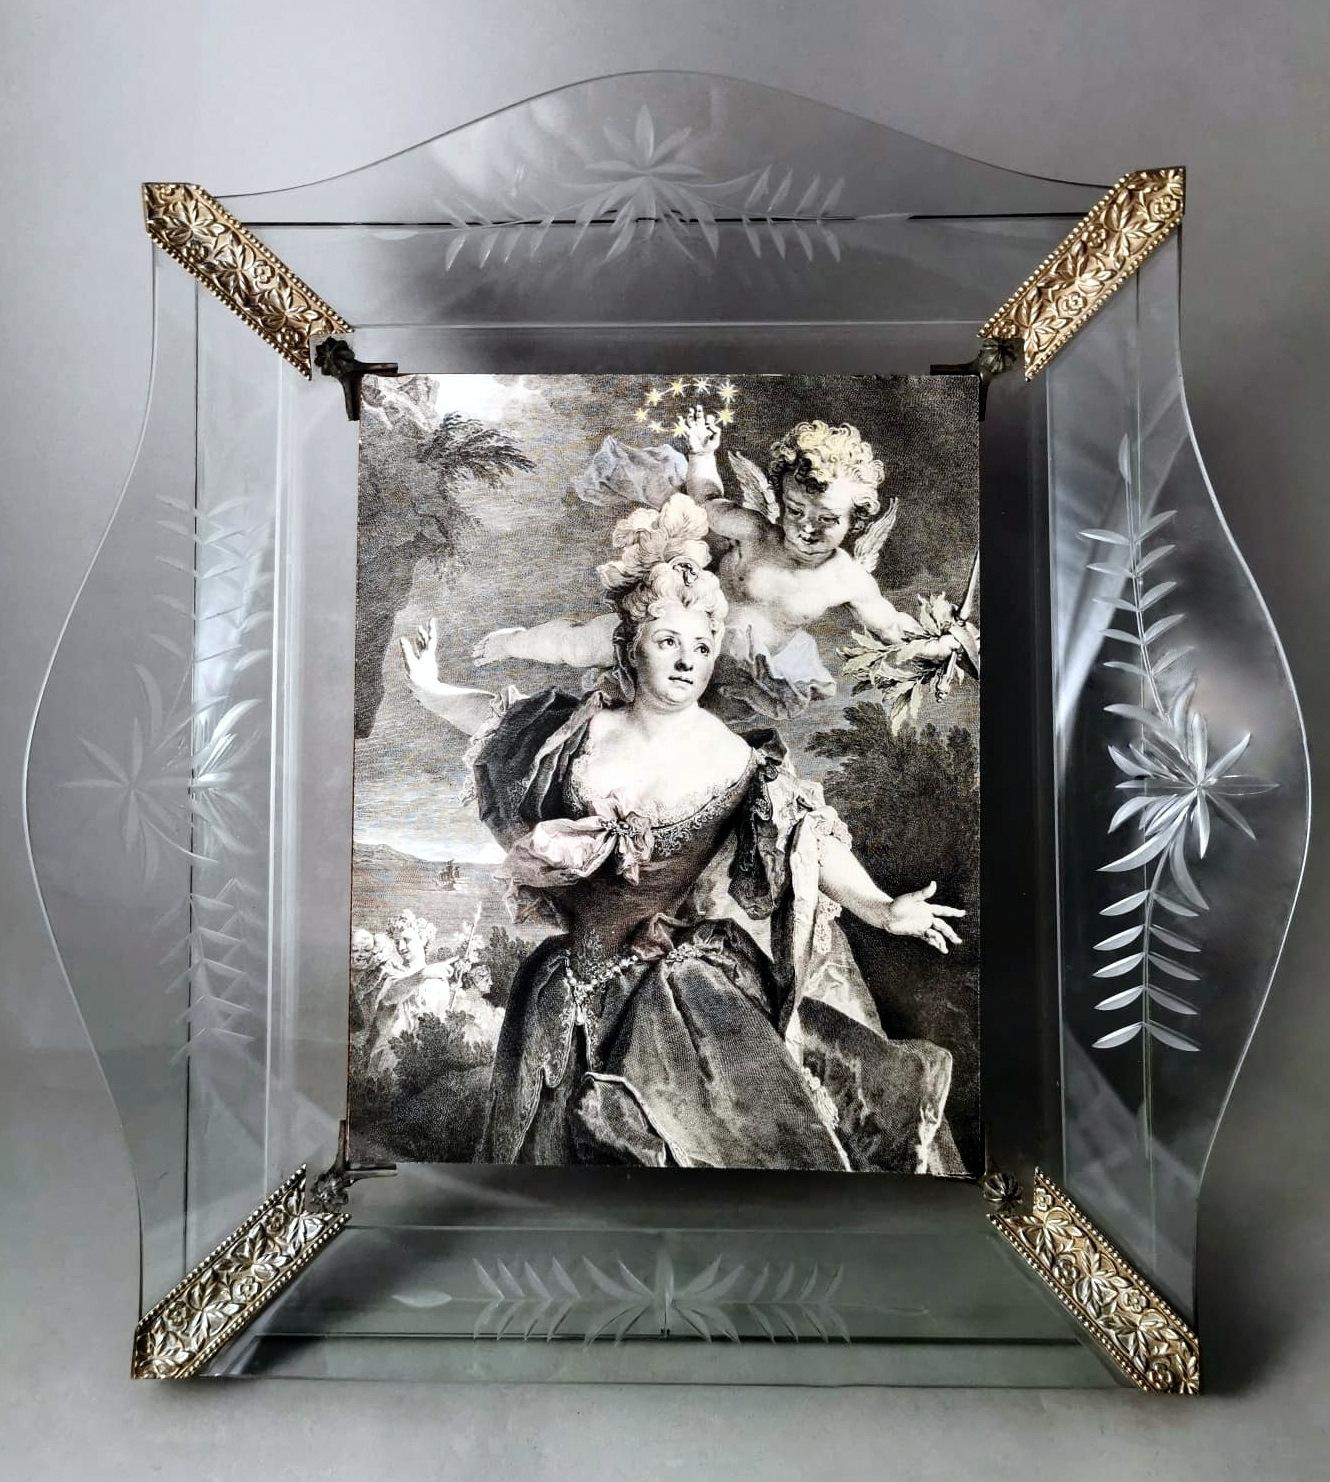 We kindly suggest you read the whole description, as with it we try to give you detailed technical and historical information to guarantee the authenticity of our objects.
Exceptional and rare vintage Italian crystal frame; very particular is its